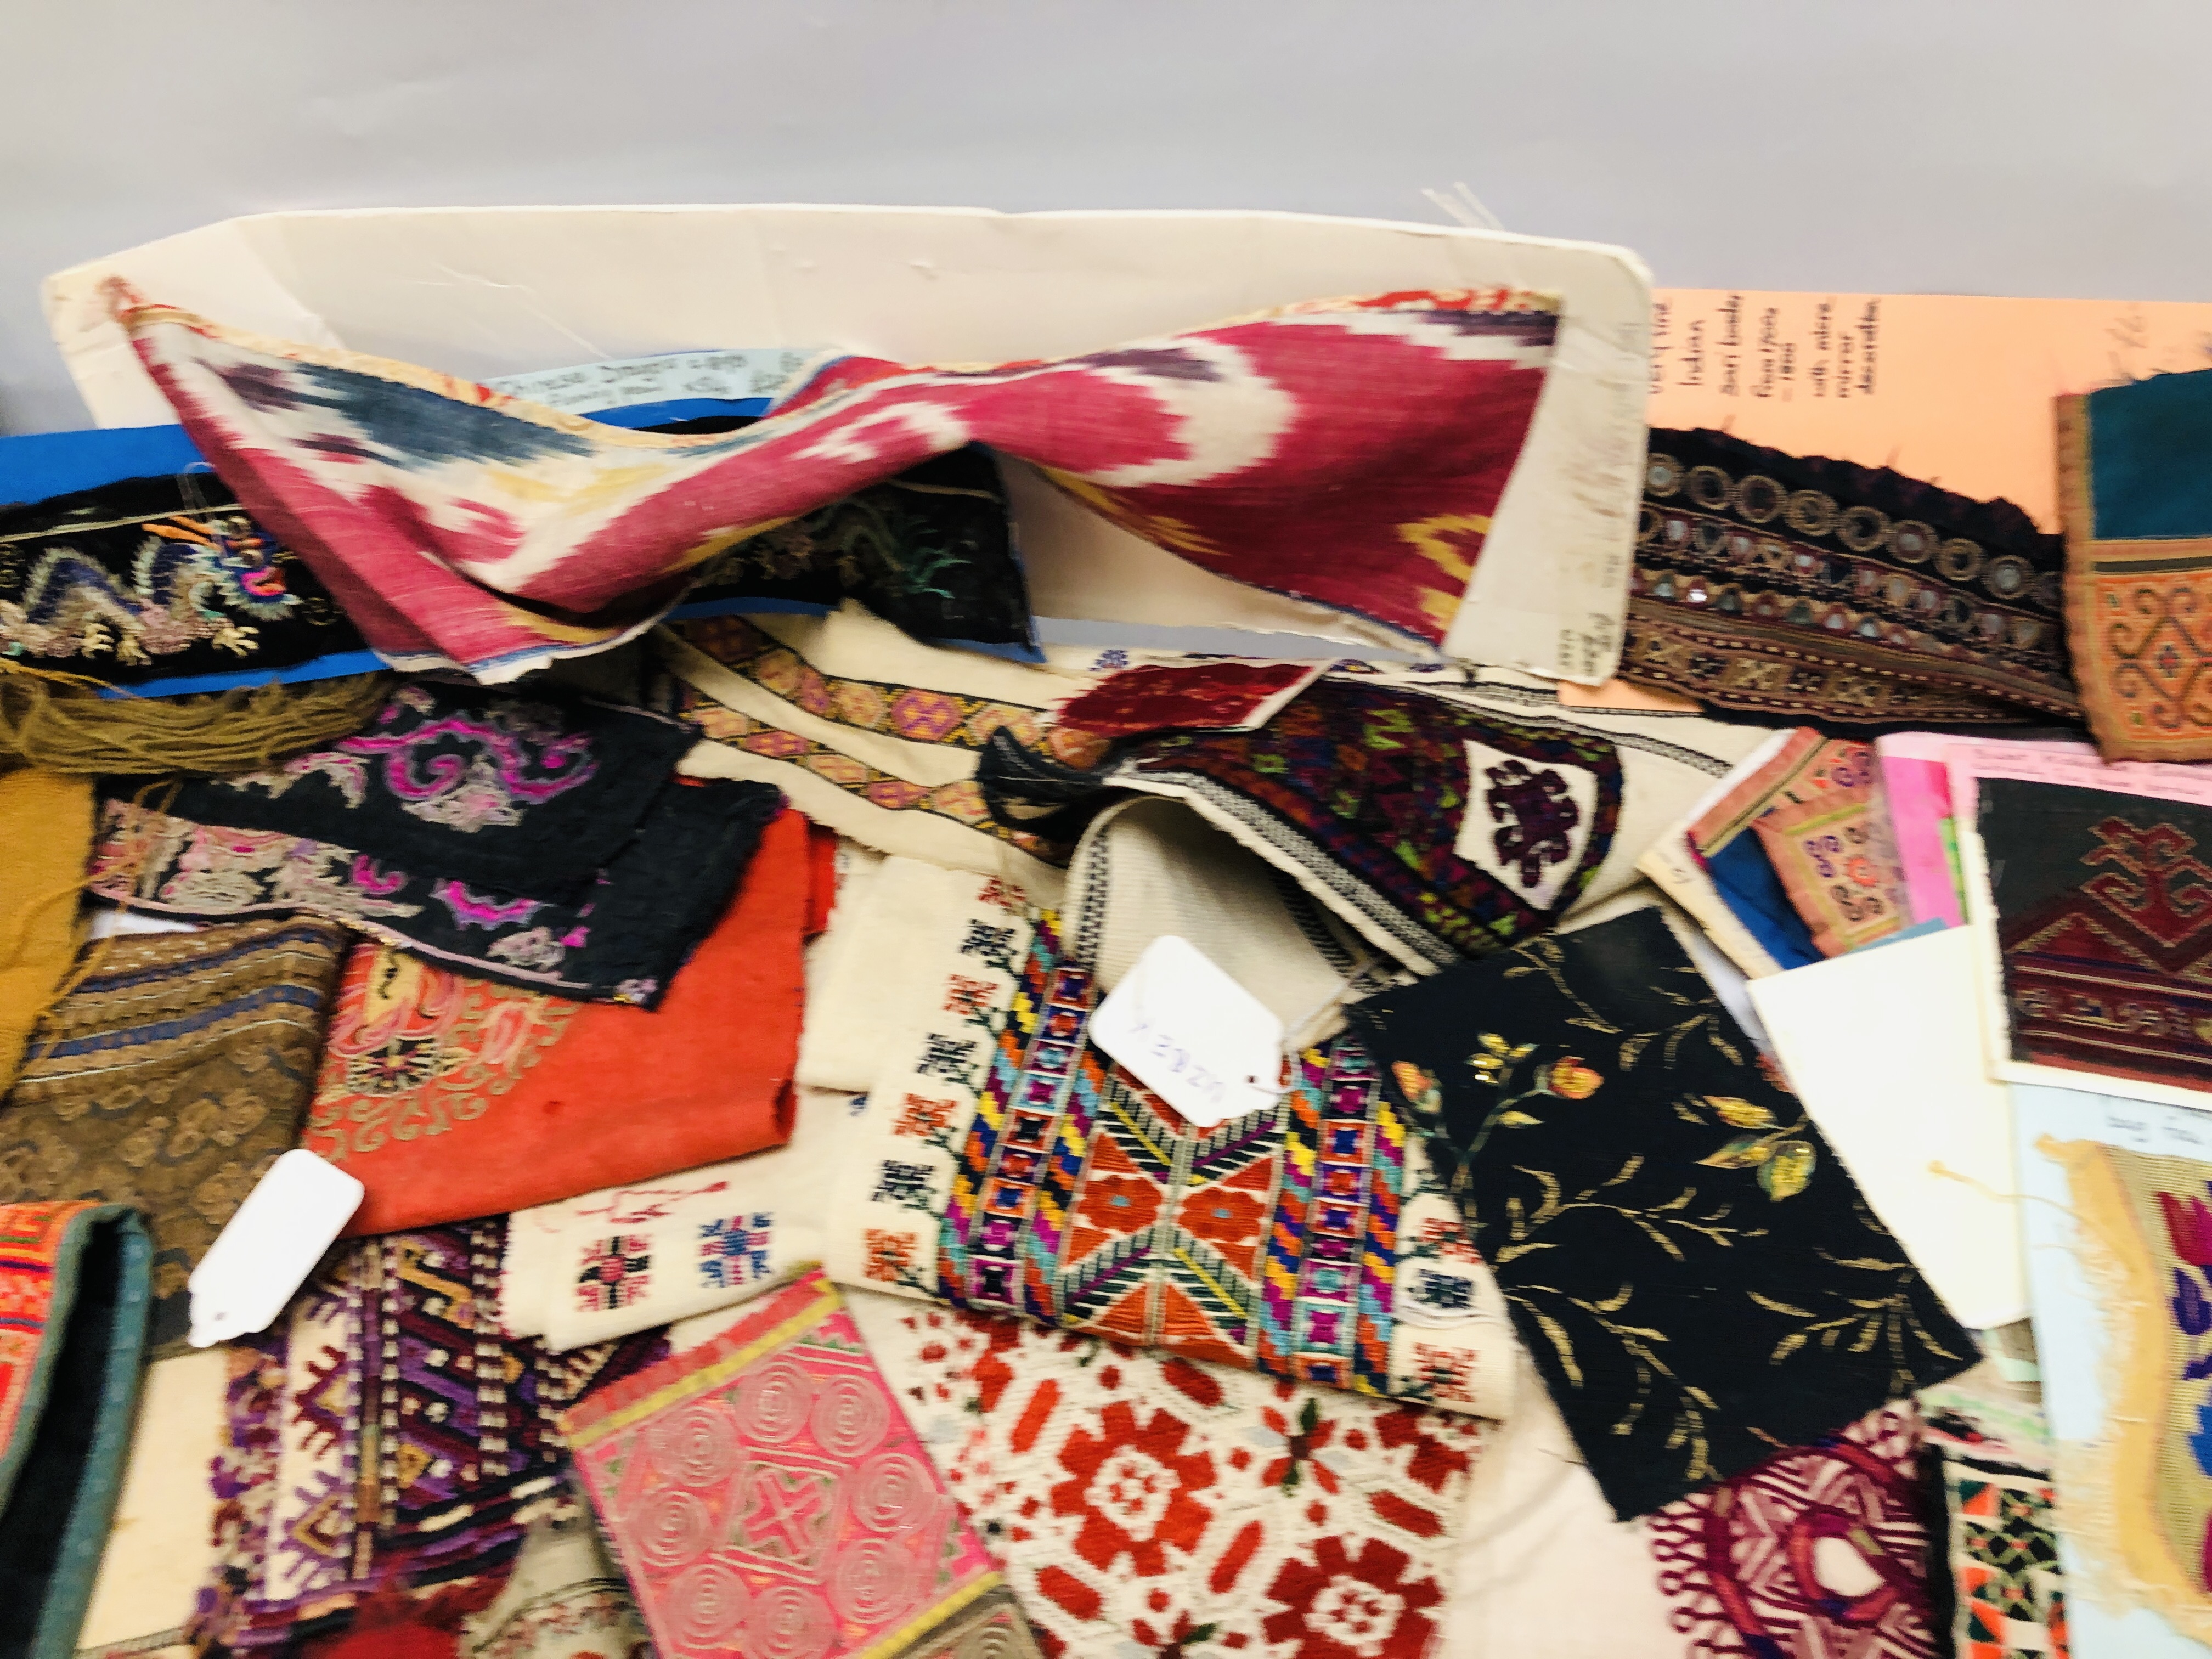 TWO BOXES CONTAINING AN EXTENSIVE COLLECTION OF TEXTILES EXAMPLES. - Image 5 of 8